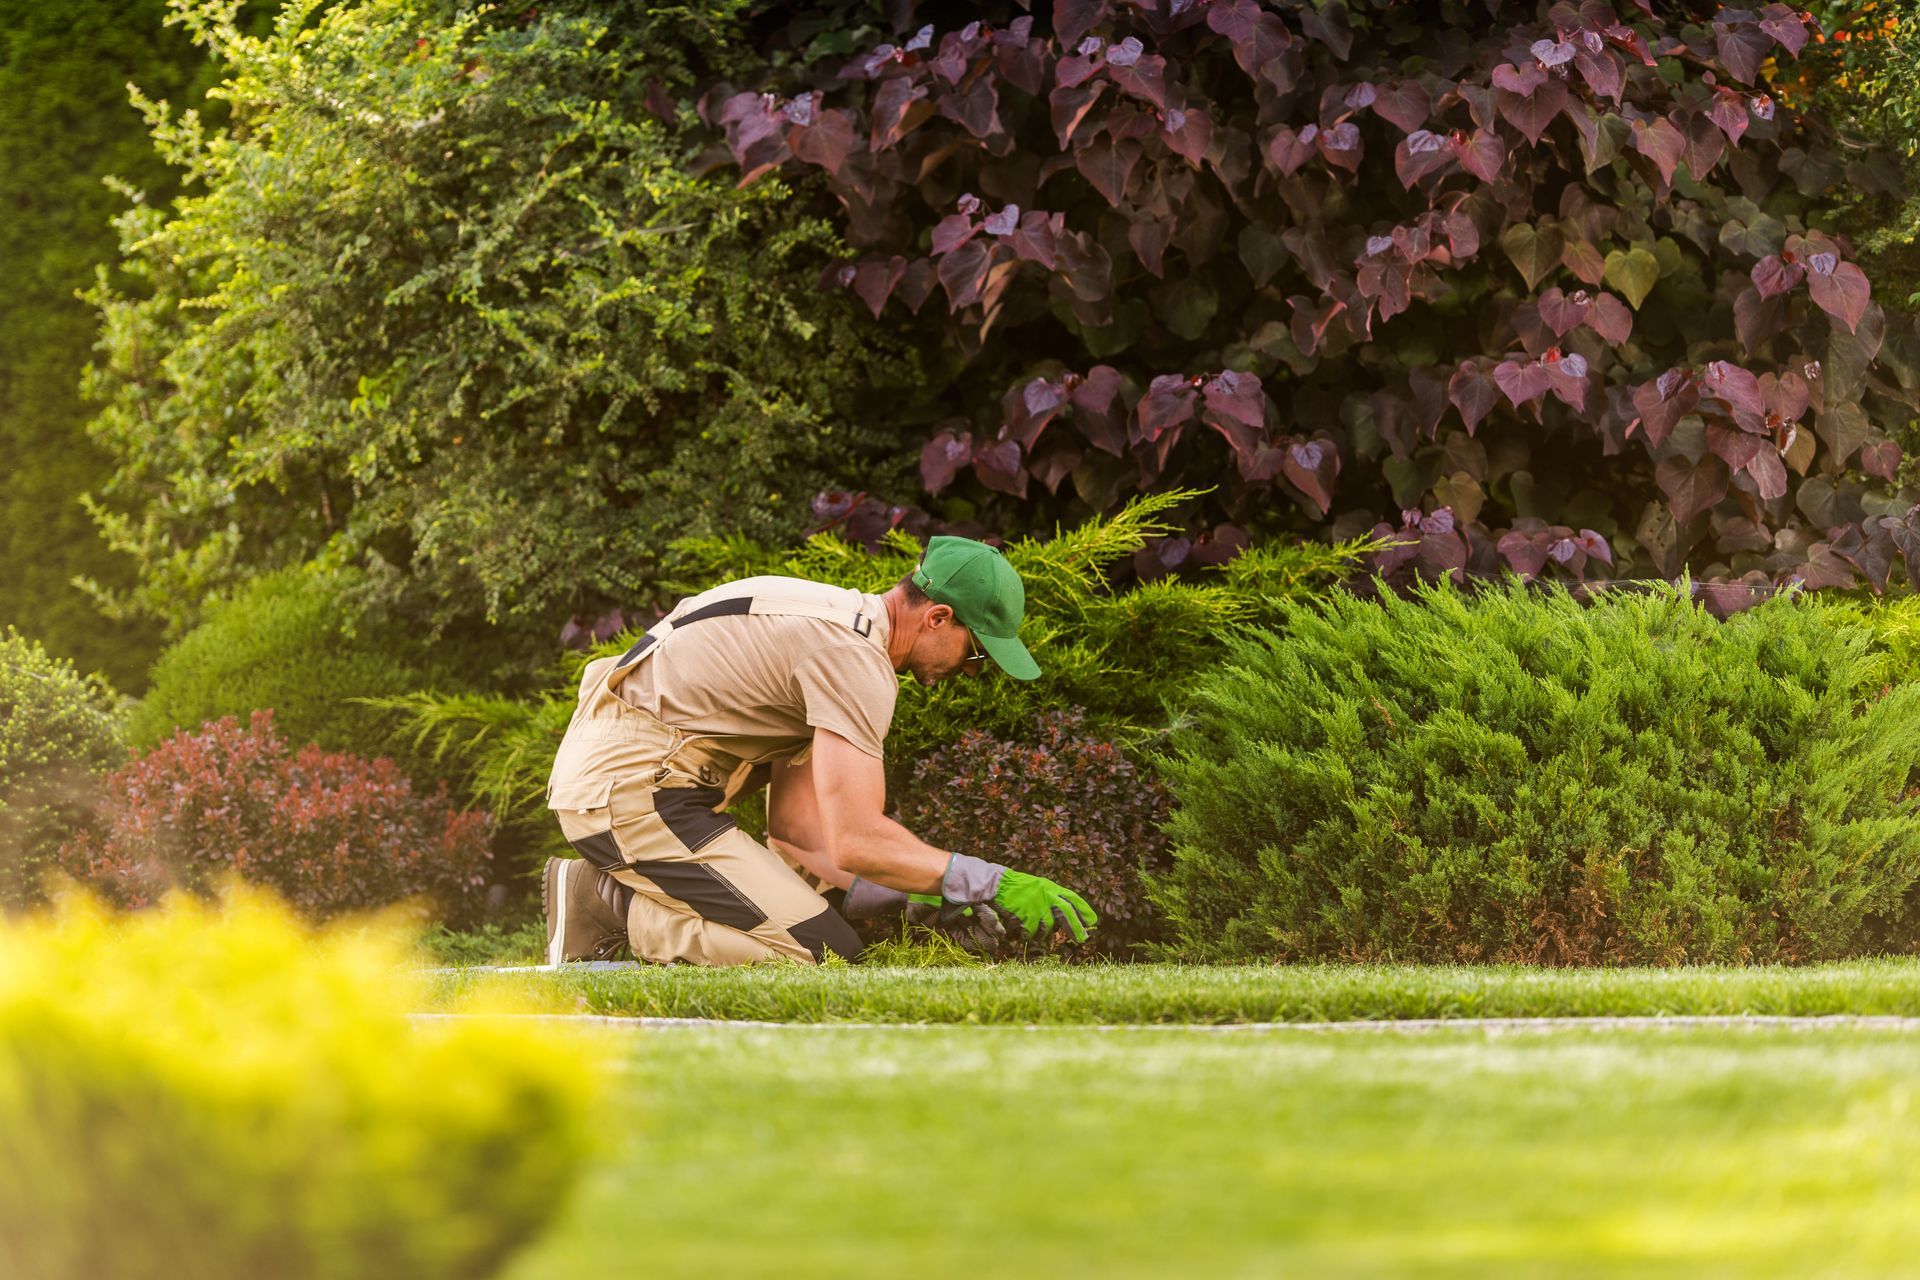 a man is kneeling down in the grass in a garden .